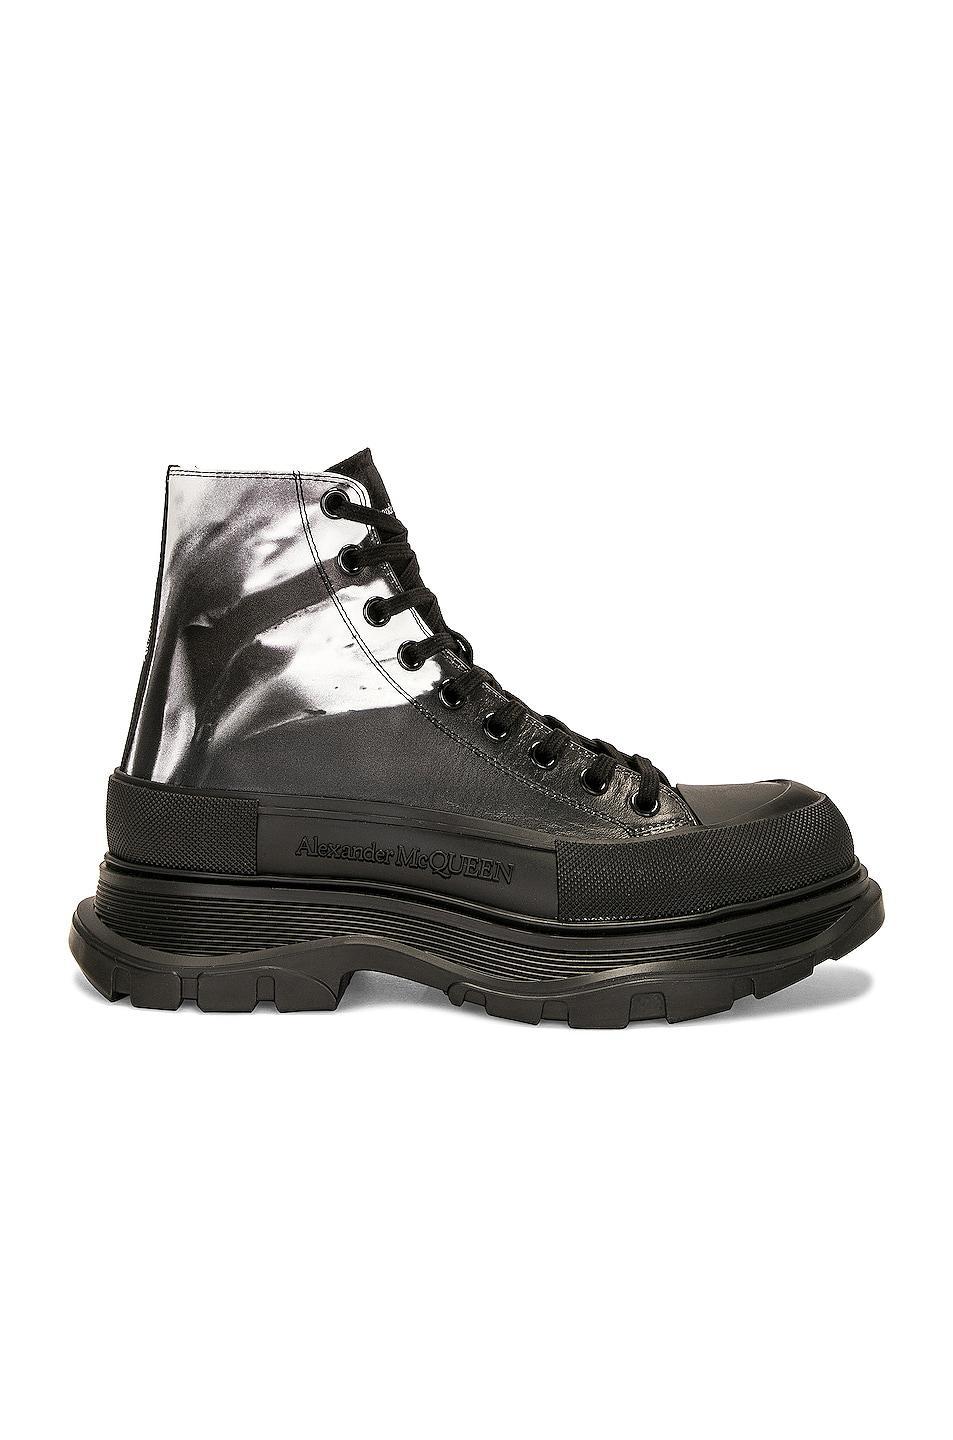 Boot Product Image